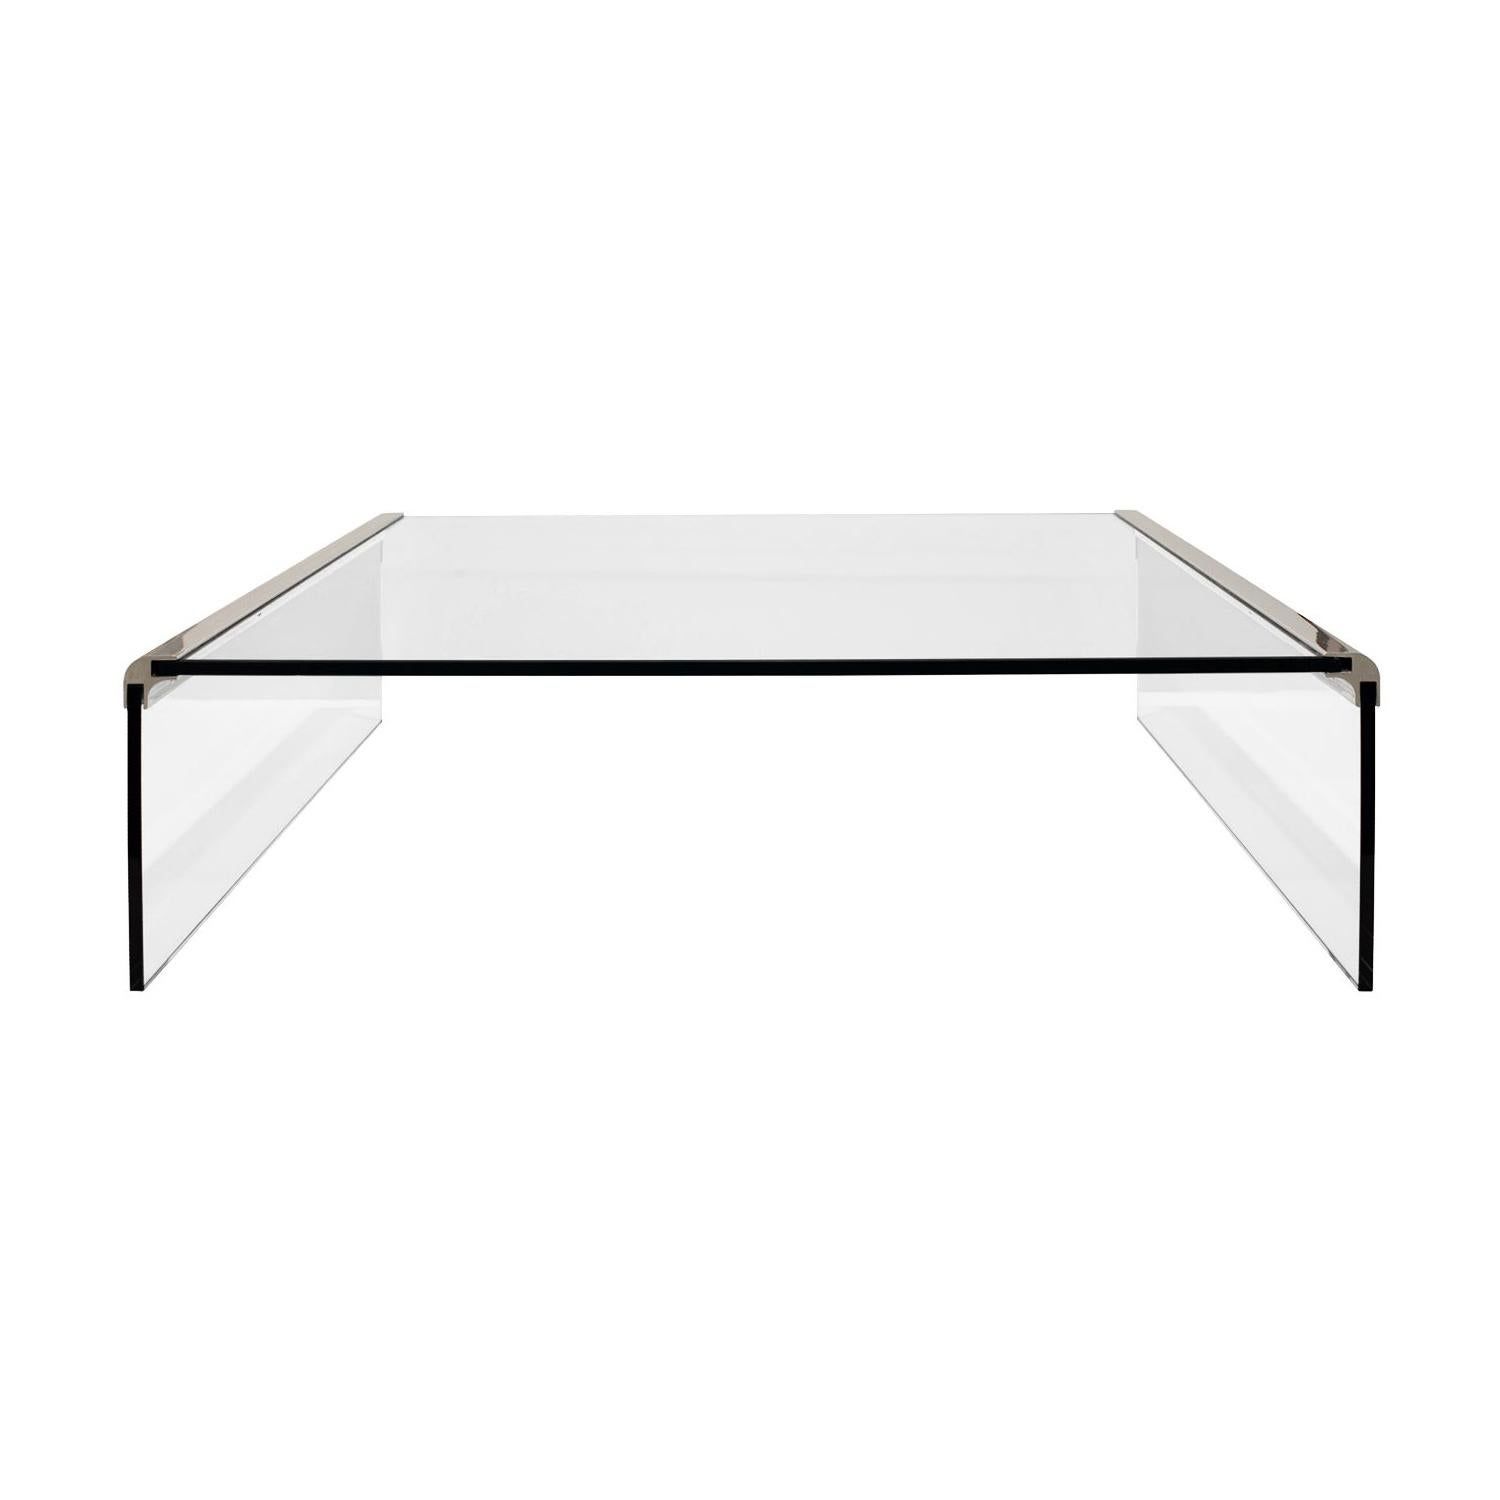 Modern Bent Glass Waterfall Coffee Table At 1stdibs Pertaining To Waterproof Coffee Tables (Gallery 17 of 21)